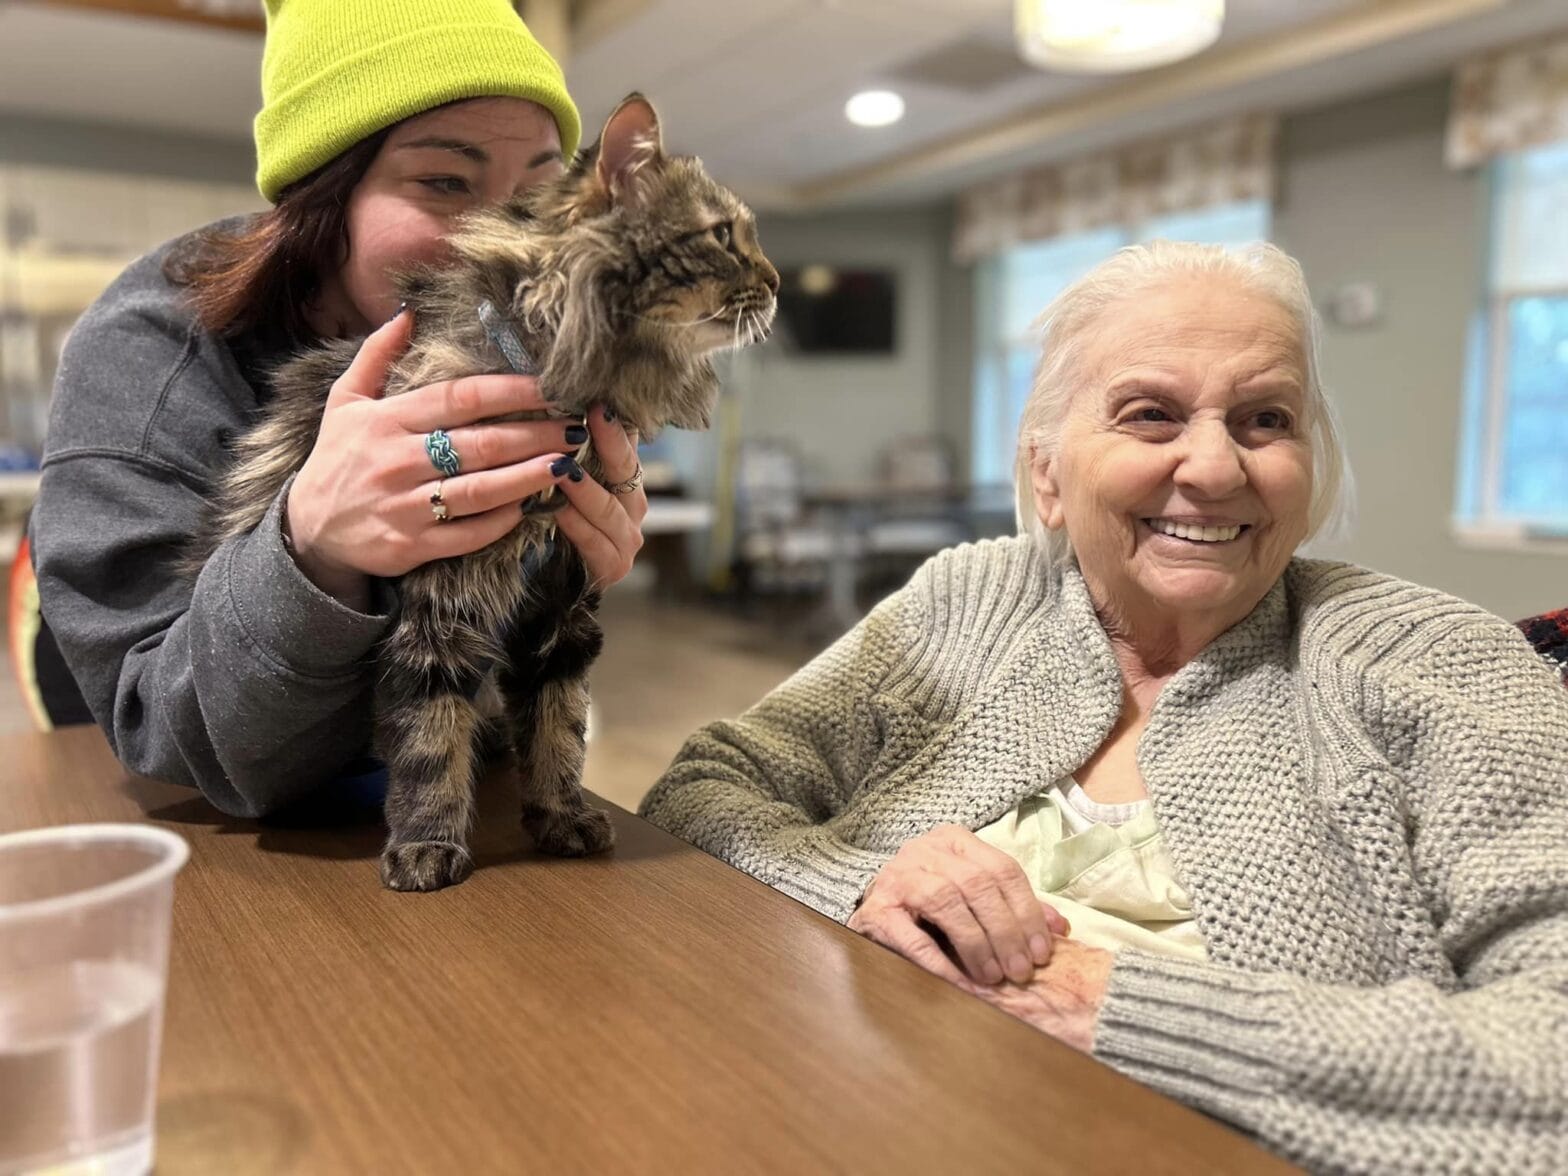 Smiling resident with cat on a table looking at her